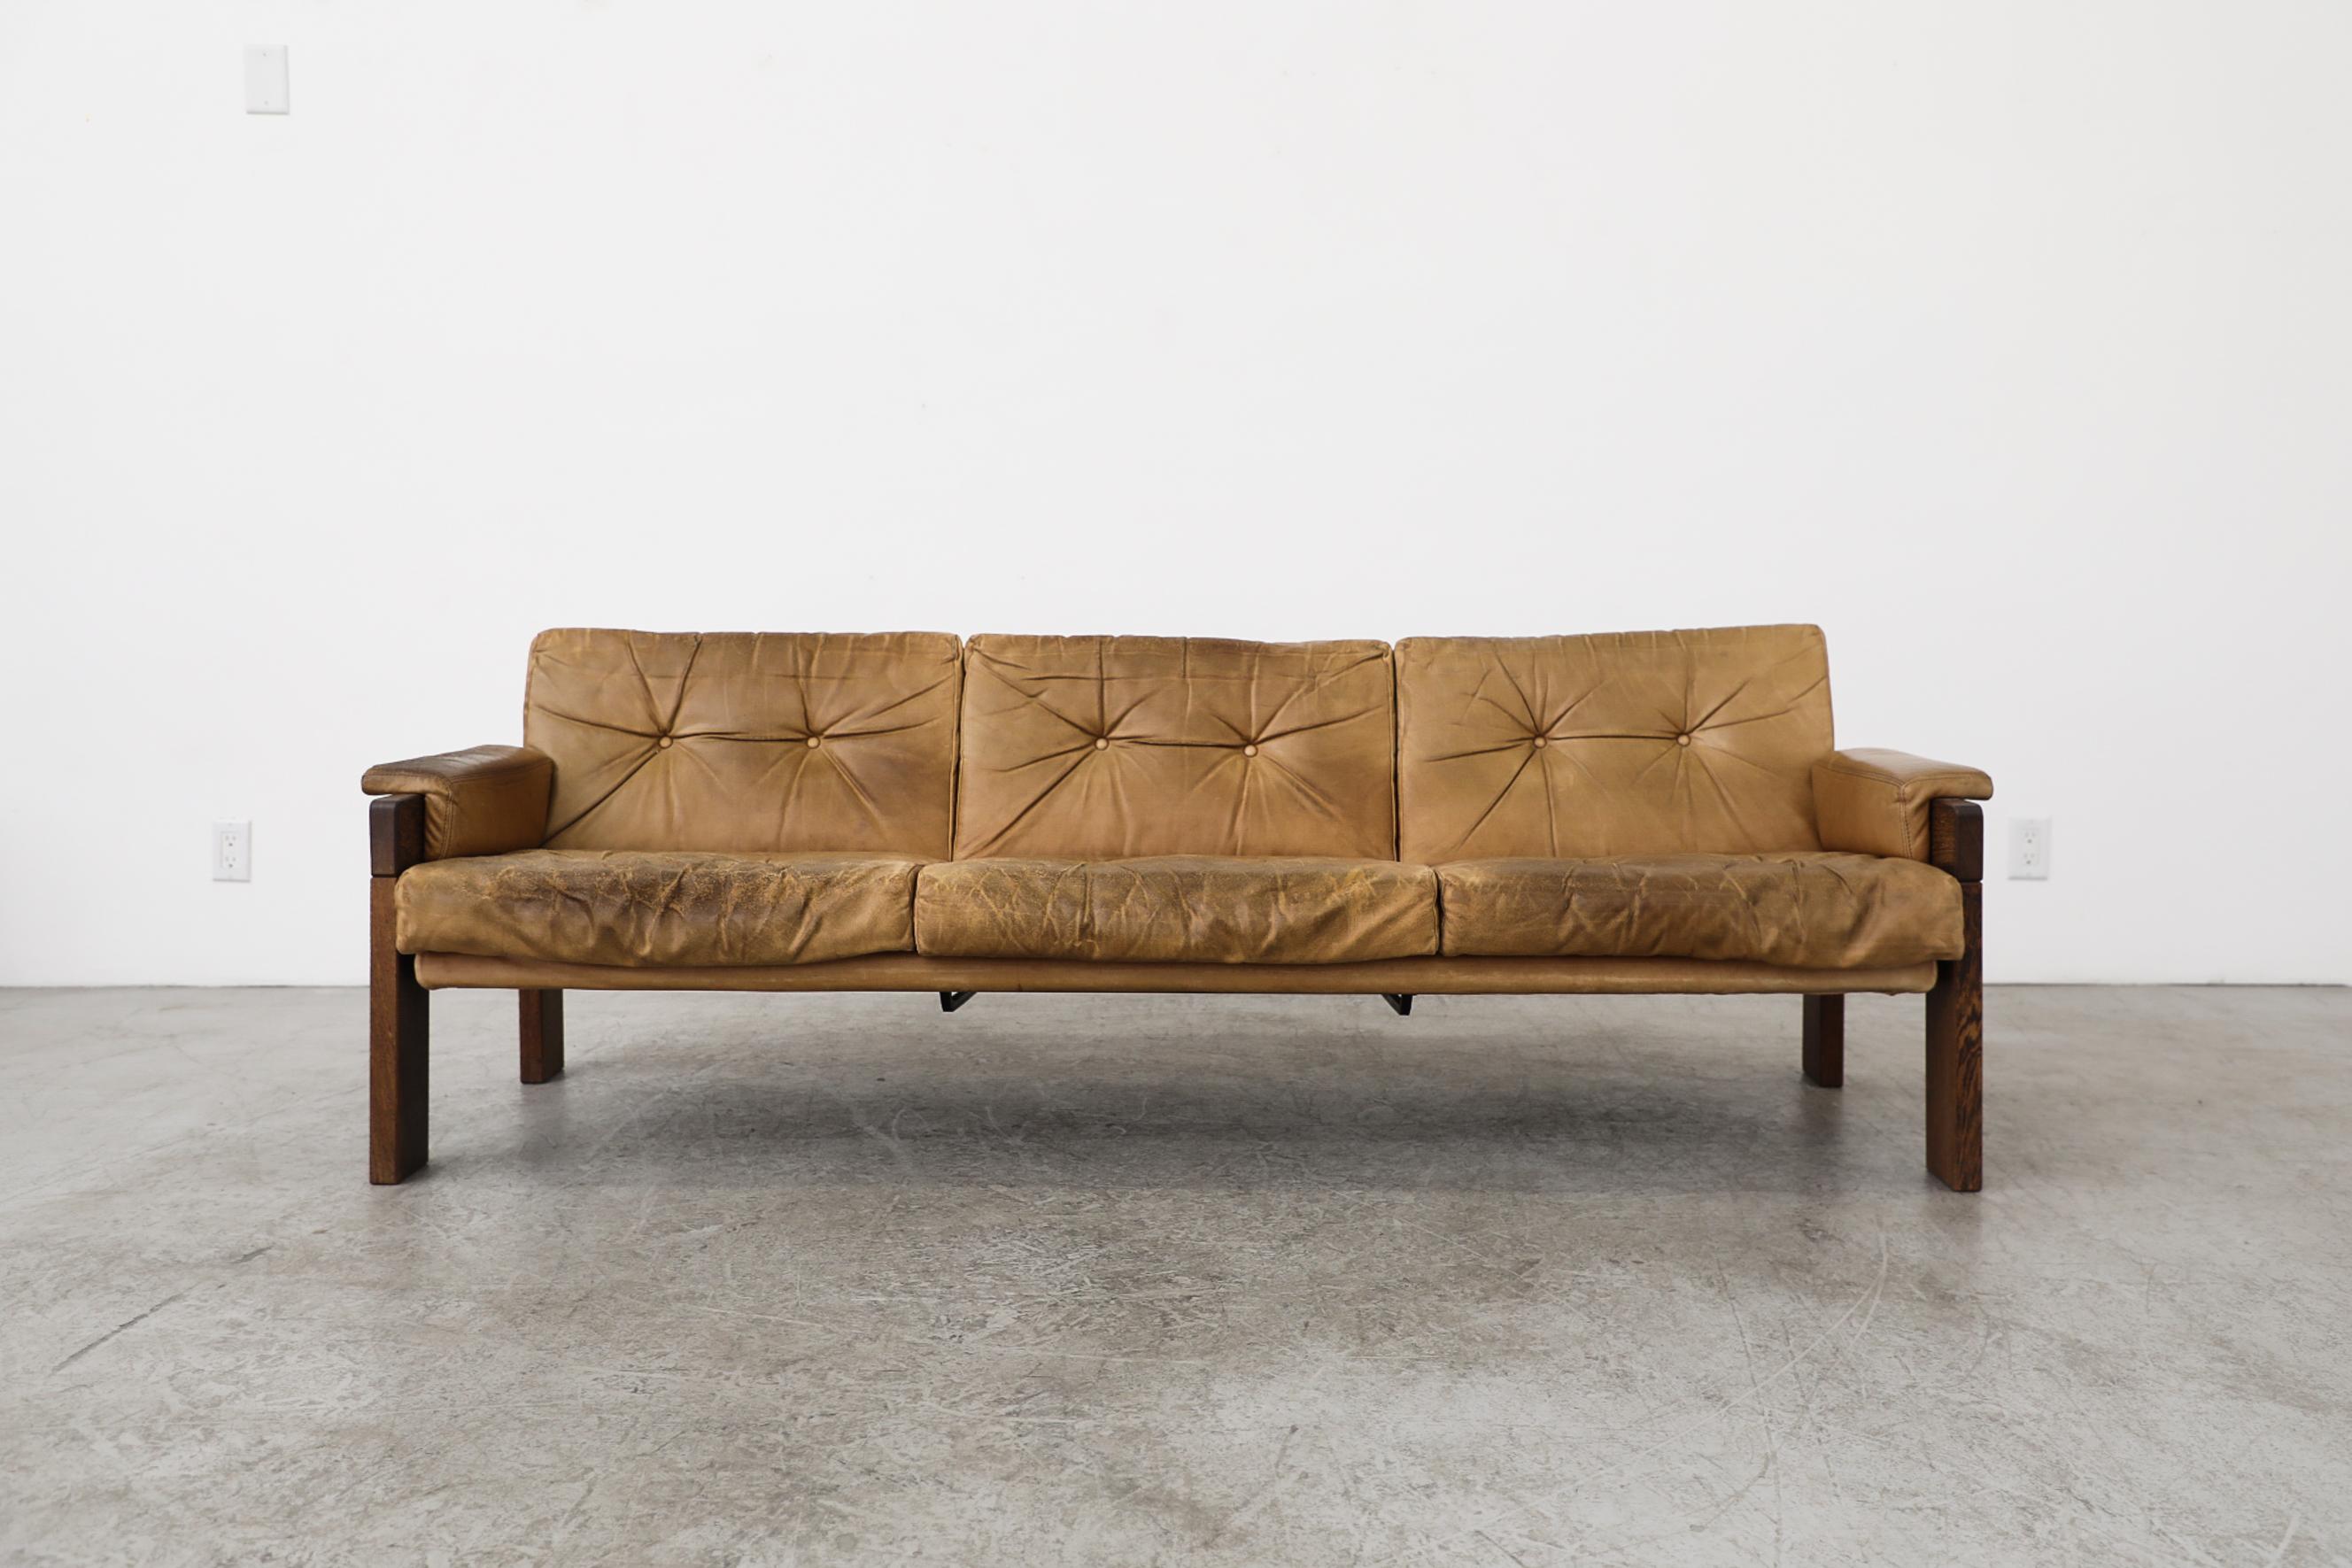 Mid century 1970's wenge and caramel leather sofa designed by Martin Visser for renowned Dutch furniture manufacturer 't Spectrum. Honest use of materials, clear construction and lack of decoration are hallmarks of Visser's design and are on clear